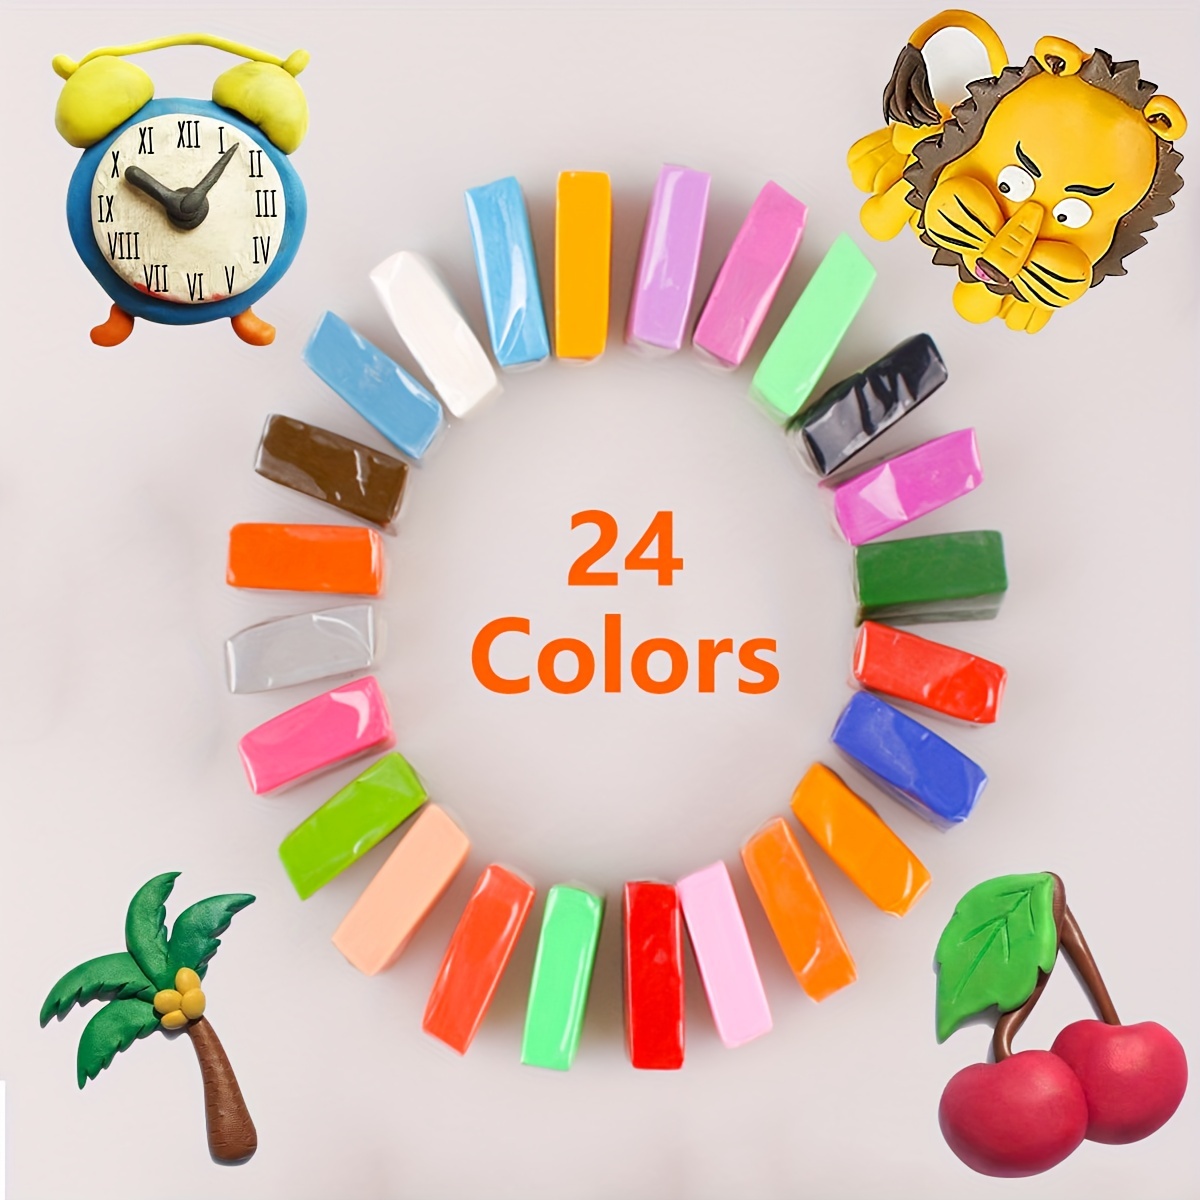 

24 Colors Small Block Polymer Clay Starter Kit, Oven Bake Clay, Non-toxic Molding Diy Clay, Great For Boys, Girls, Beginners